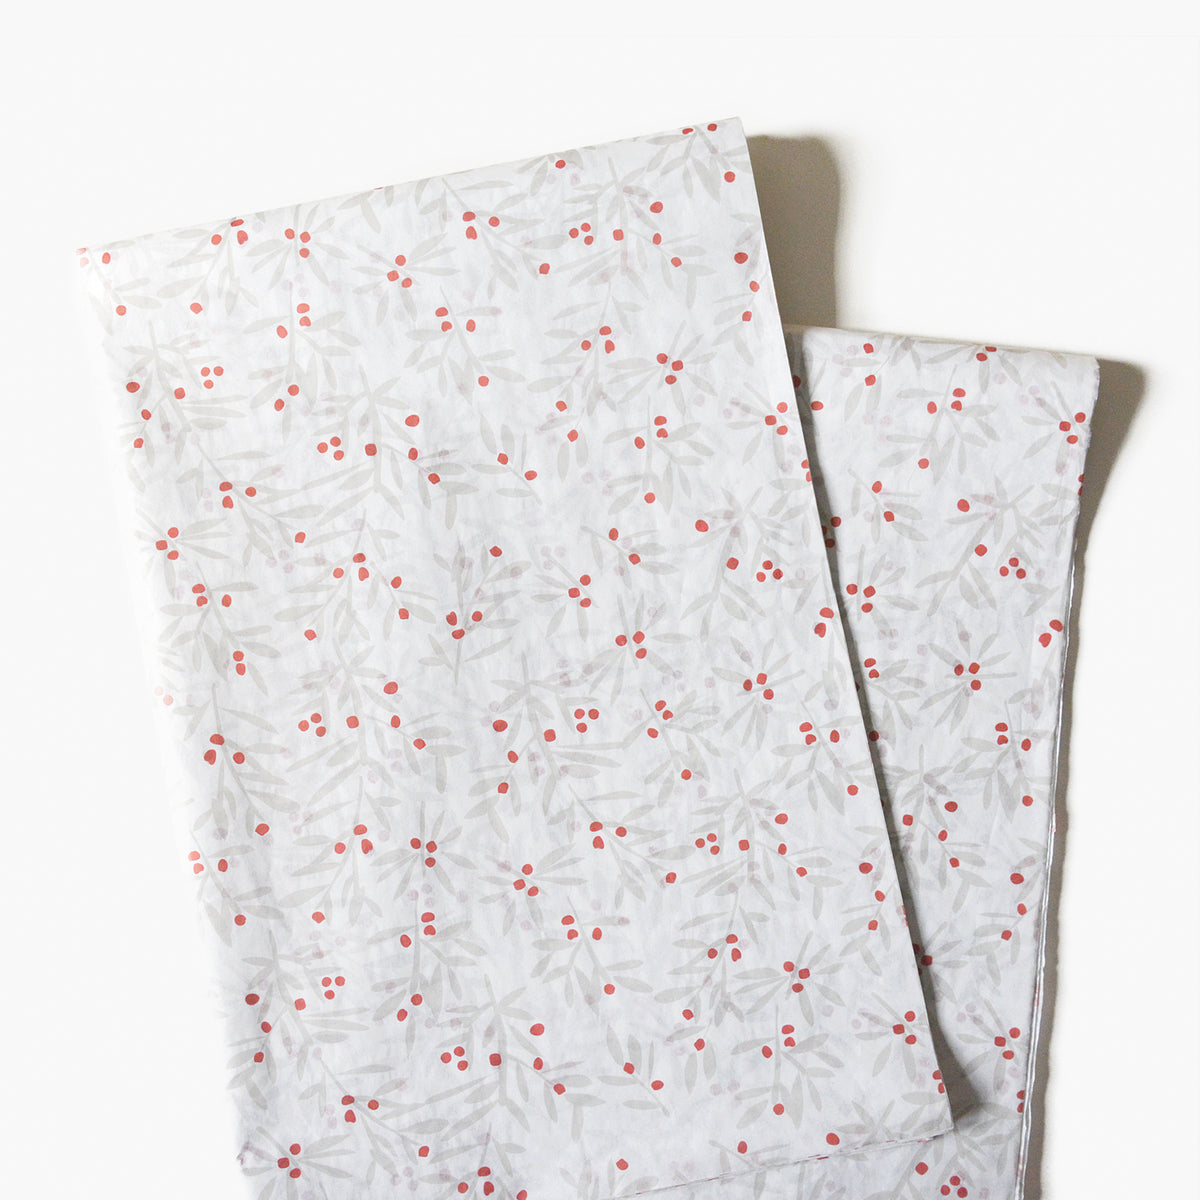 Winter Berries Tissue Paper - Christmas Holiday Gift Wrapping